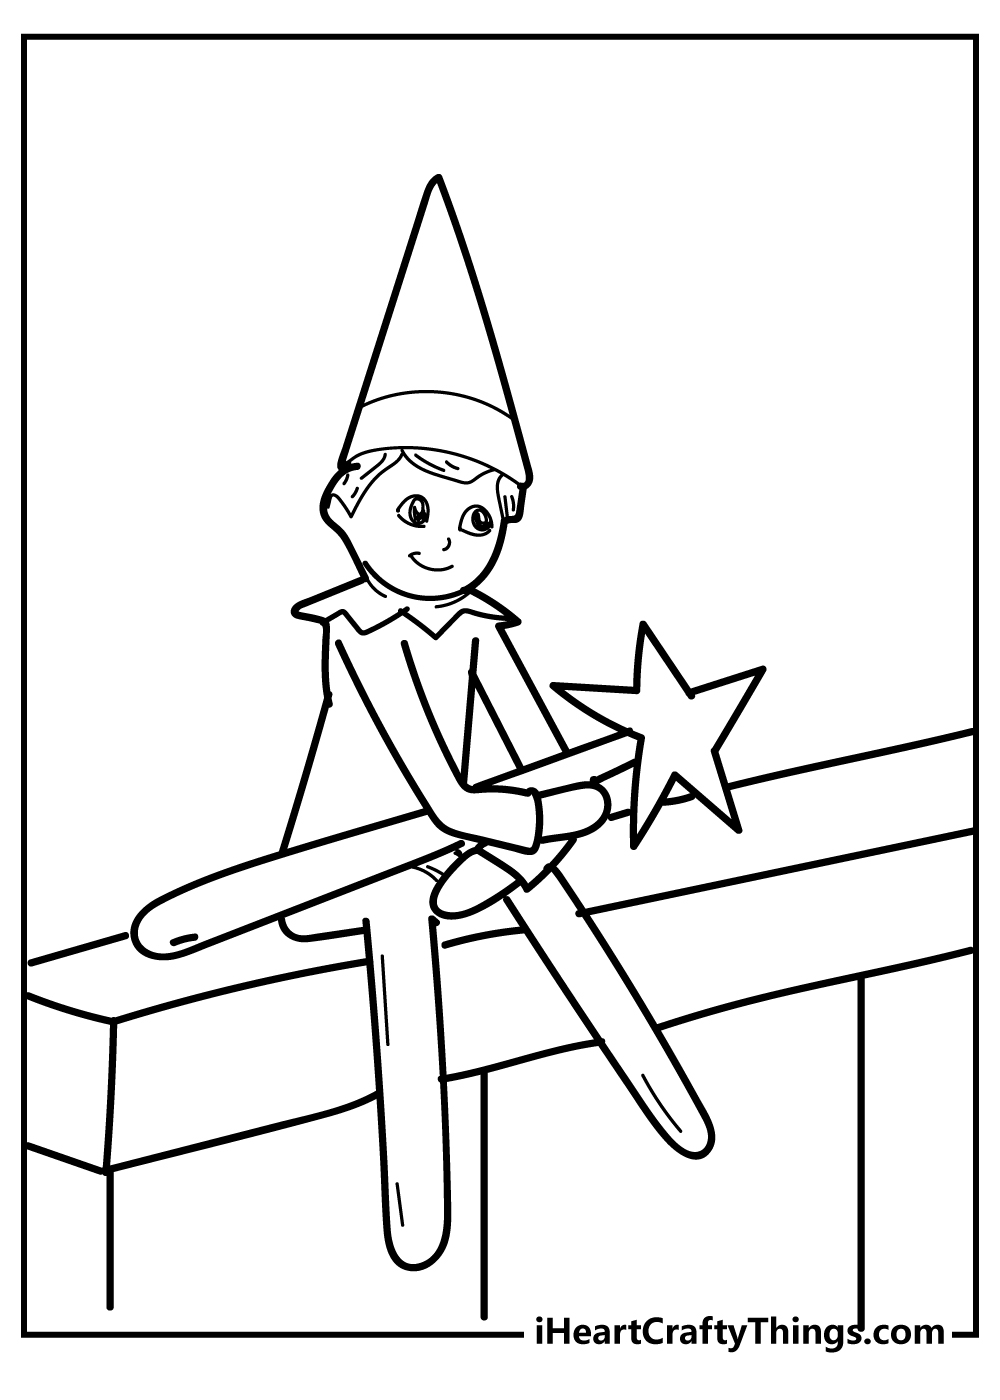 Elf on the shelf coloring pages free printables